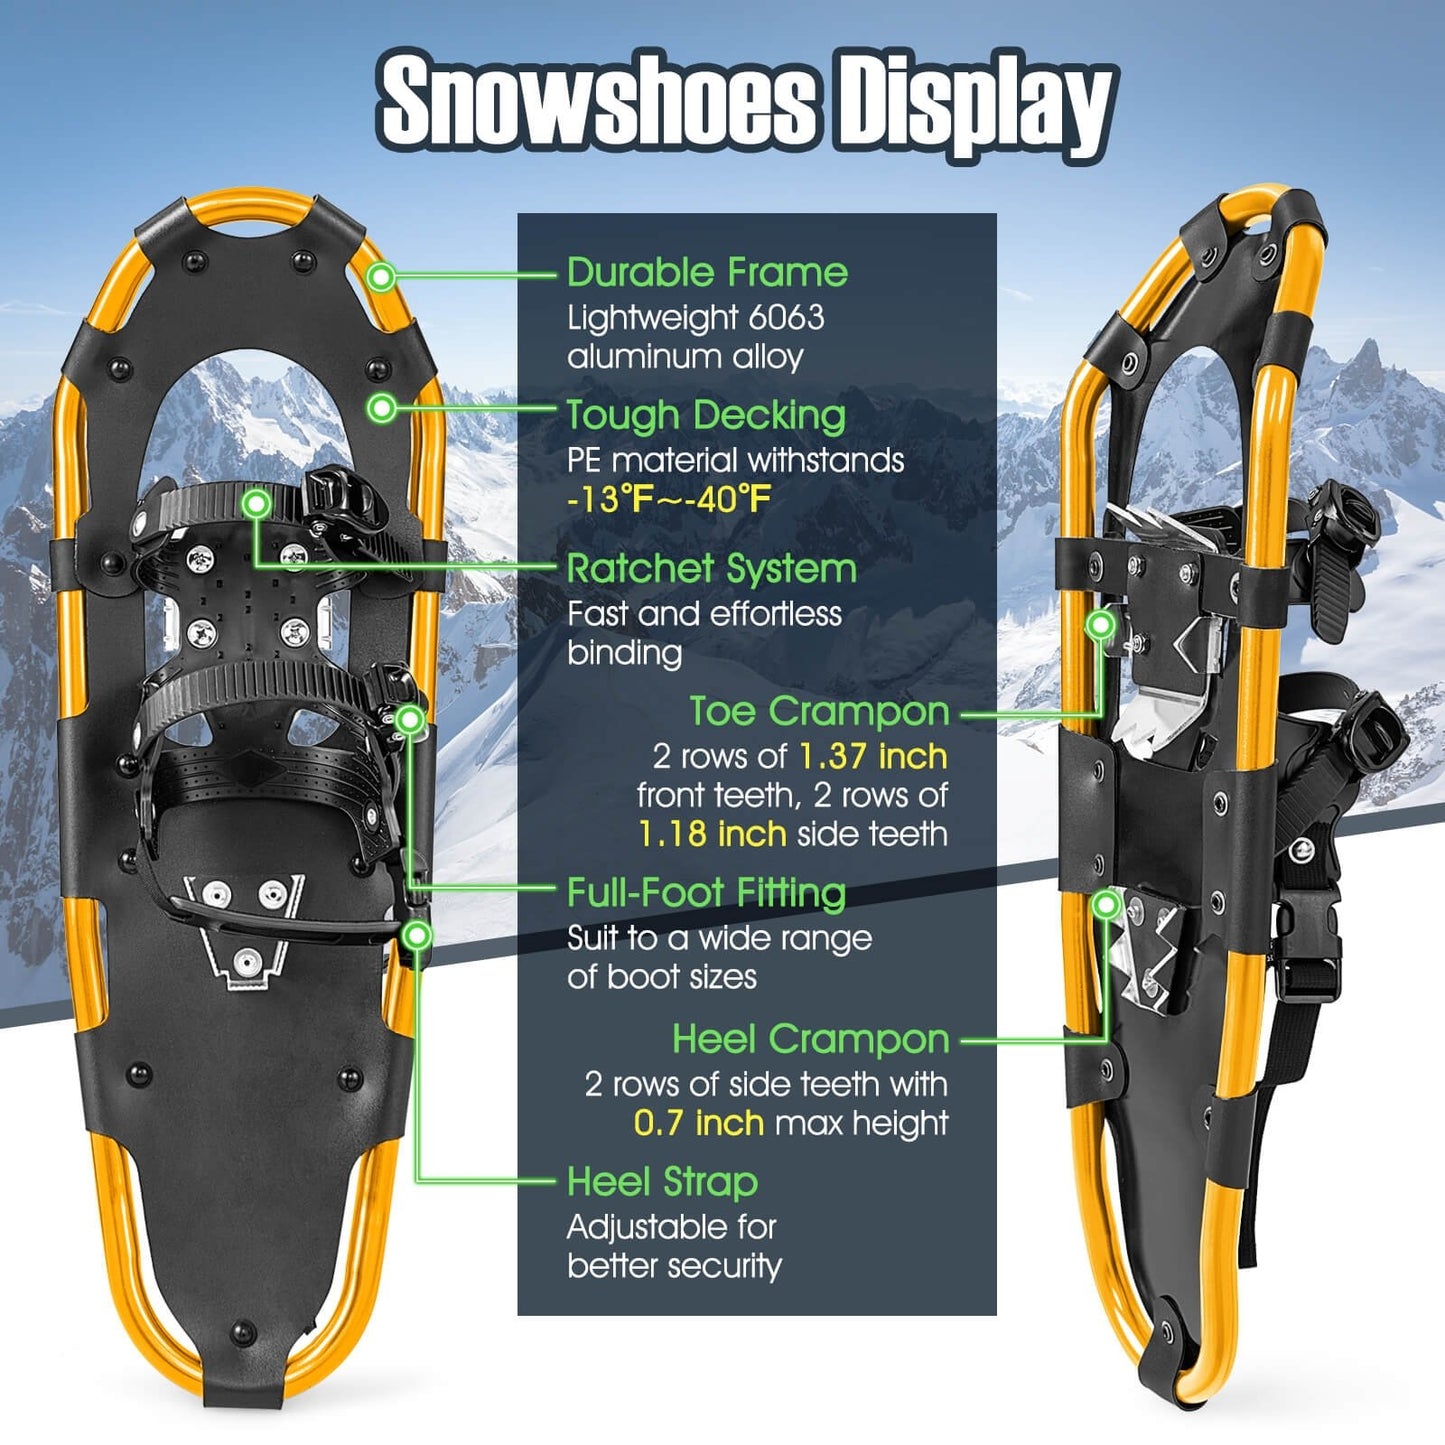 4-in-1 Lightweight Terrain Snowshoes with Flexible Pivot System-25 inches, Golden